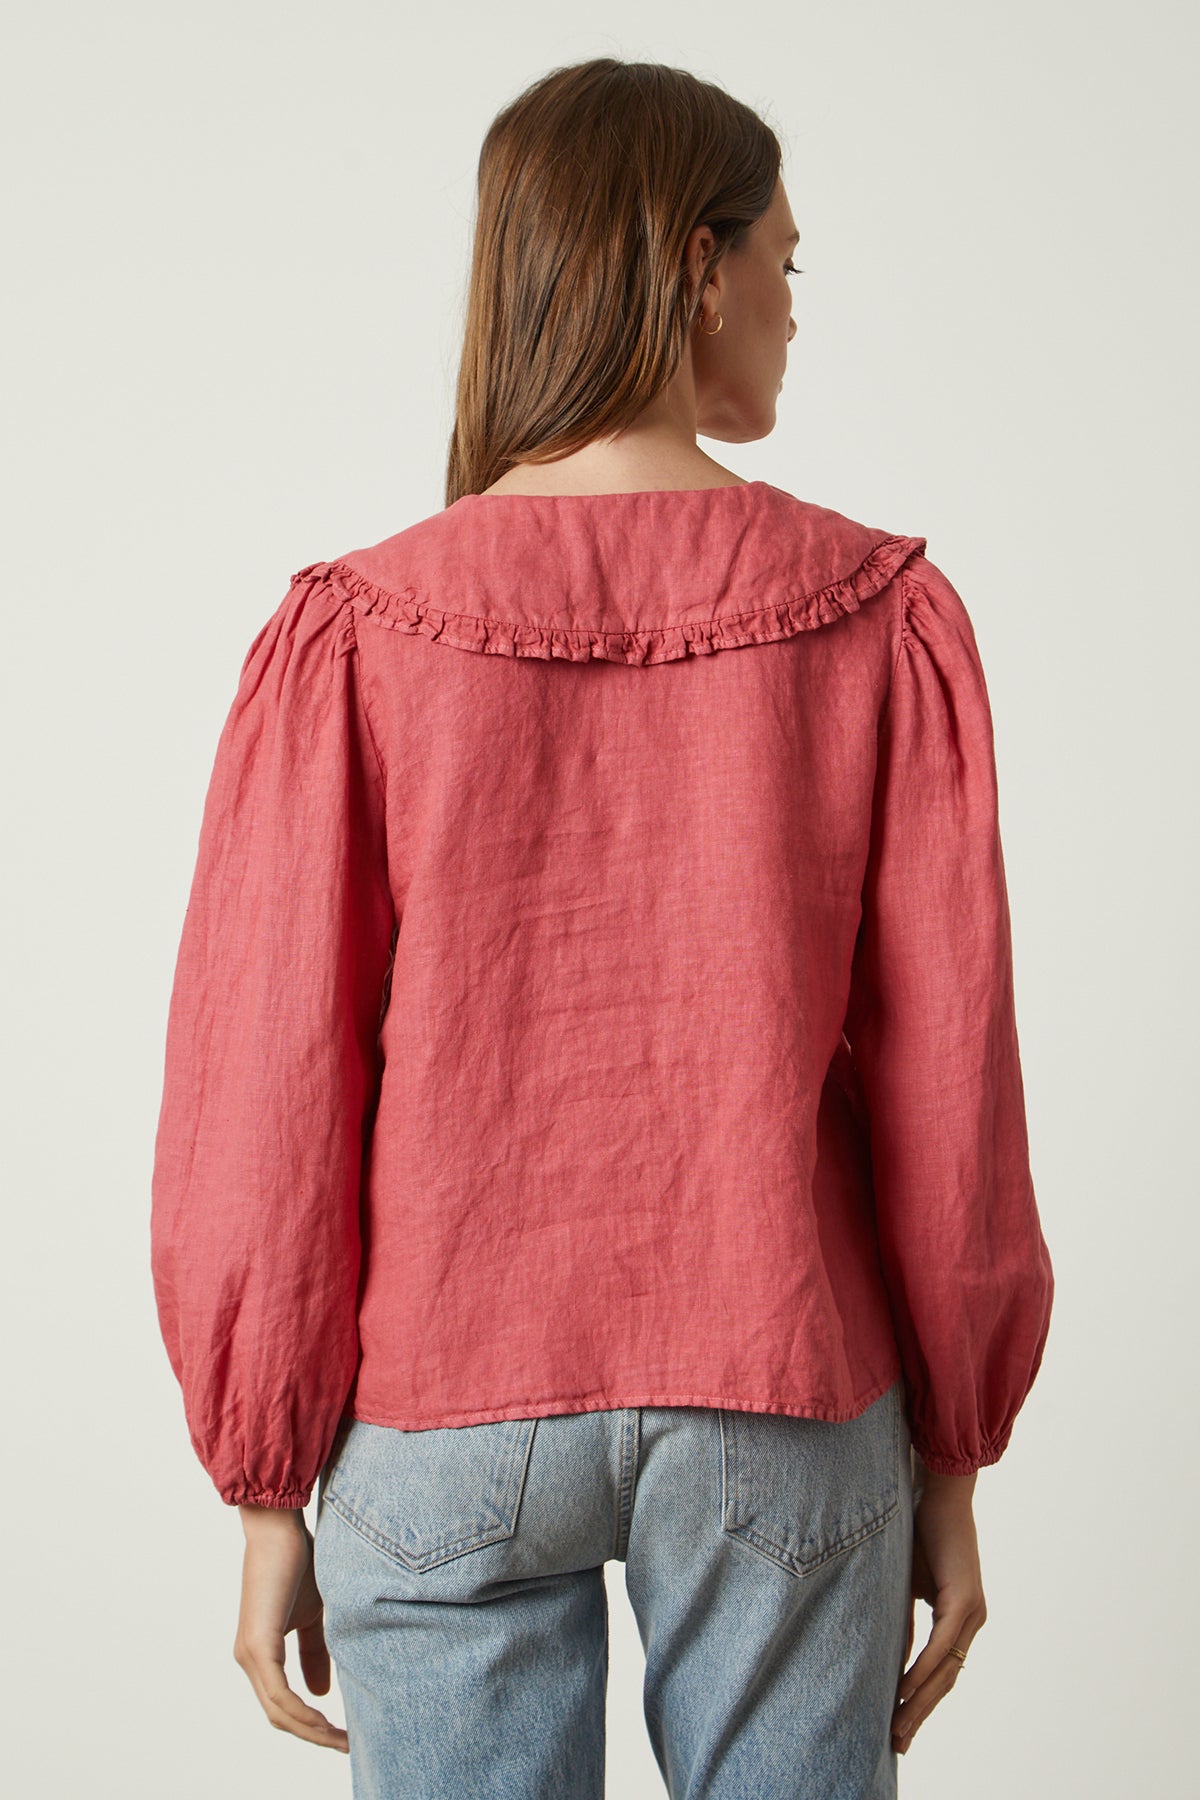   Sofia linen top in punch with light blue denim back 